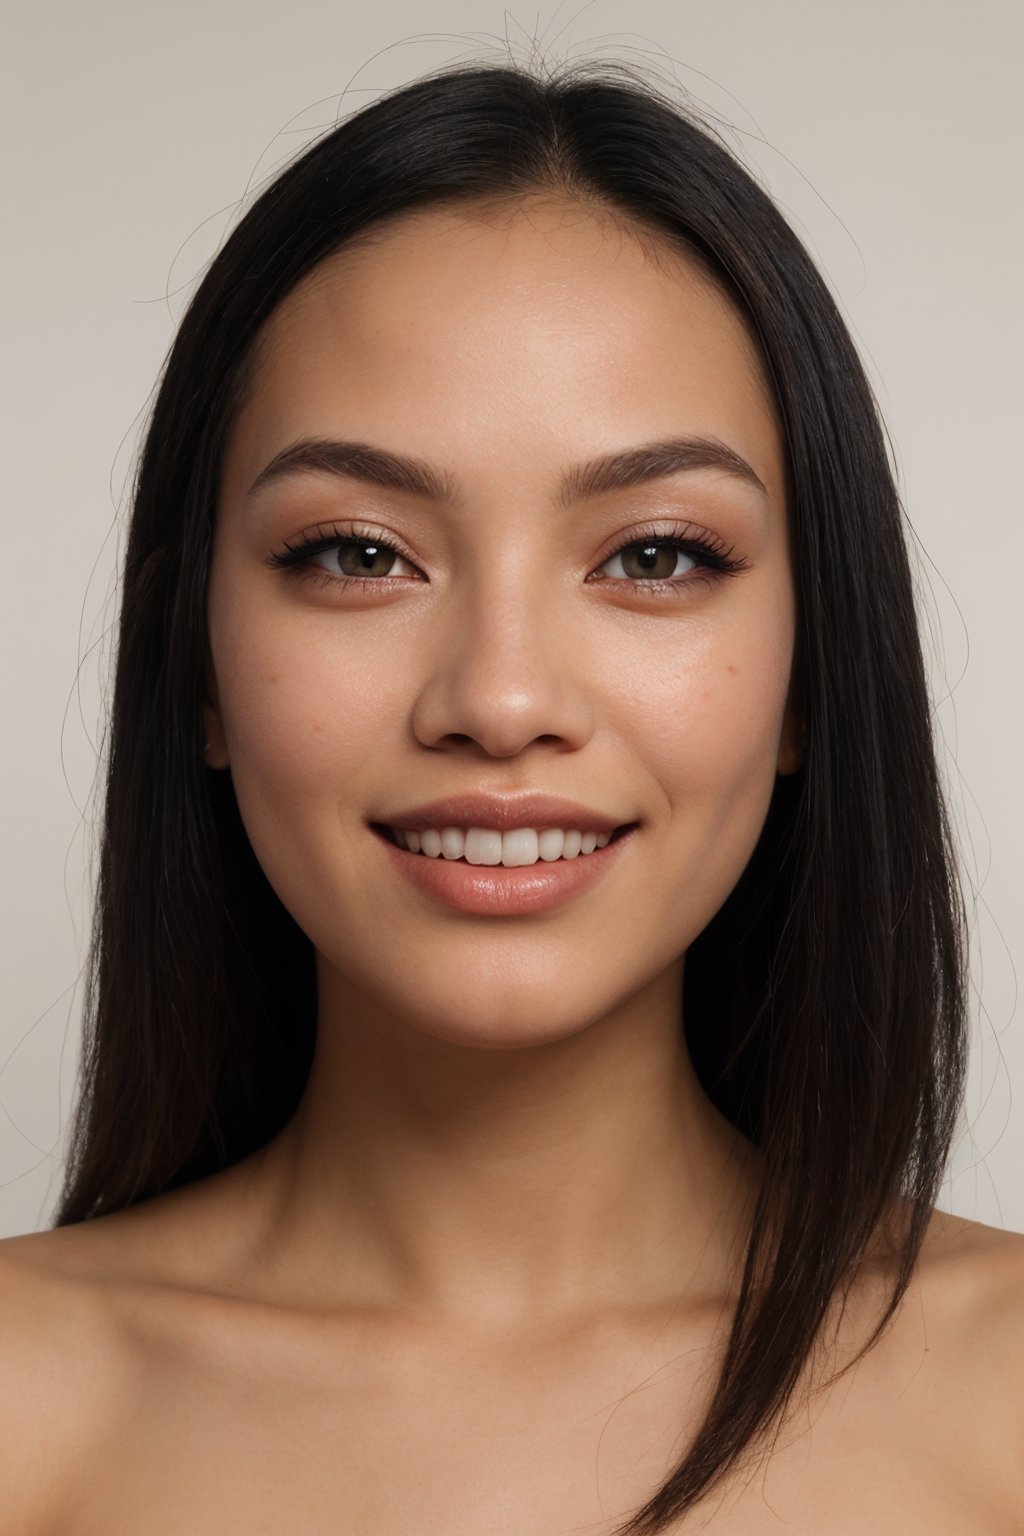 Aesthetic, best quality image, (((Filipino-Australian blood mix))), ((smiling)), (((black straight thin hair))), (((highly detailed black Filipino eyes 1.4))),  (((tender small breast))), Kite face shape: 2.0, High resolution soft skin complexion, close set tiny eyes, Thin rounded eye brows:2.85, small thin lips:2.5, Beautiful perfect teeth, concave contour nose, straight base nose, medium nose, pointed ear,(((white skin complexion))), a 20 year old woman, Filipino-Italian blood mix: 4.0, naked: 5.0, nude: 5.0, 
    smiling, black straight thin hair, highly detailed black Filipino eyes, tender small breast: 5.0, 
    pinkies nipple: 5.0, no bra:5.0, white skin complexion, Perfect human hands, 
    beautiful detailed hands, perfect female toes: 4.0, beautiful detailed female toes: 4.0, 
    detailed female feet: 4.0, Correct female human anatomy, hi-top fade, dark theme, 
    soothing tones, muted colors, high contrast, natural skin texture, hyperrealism, soft light,
    sharp, positive first person, portrait view, front view, thigh to head view, 